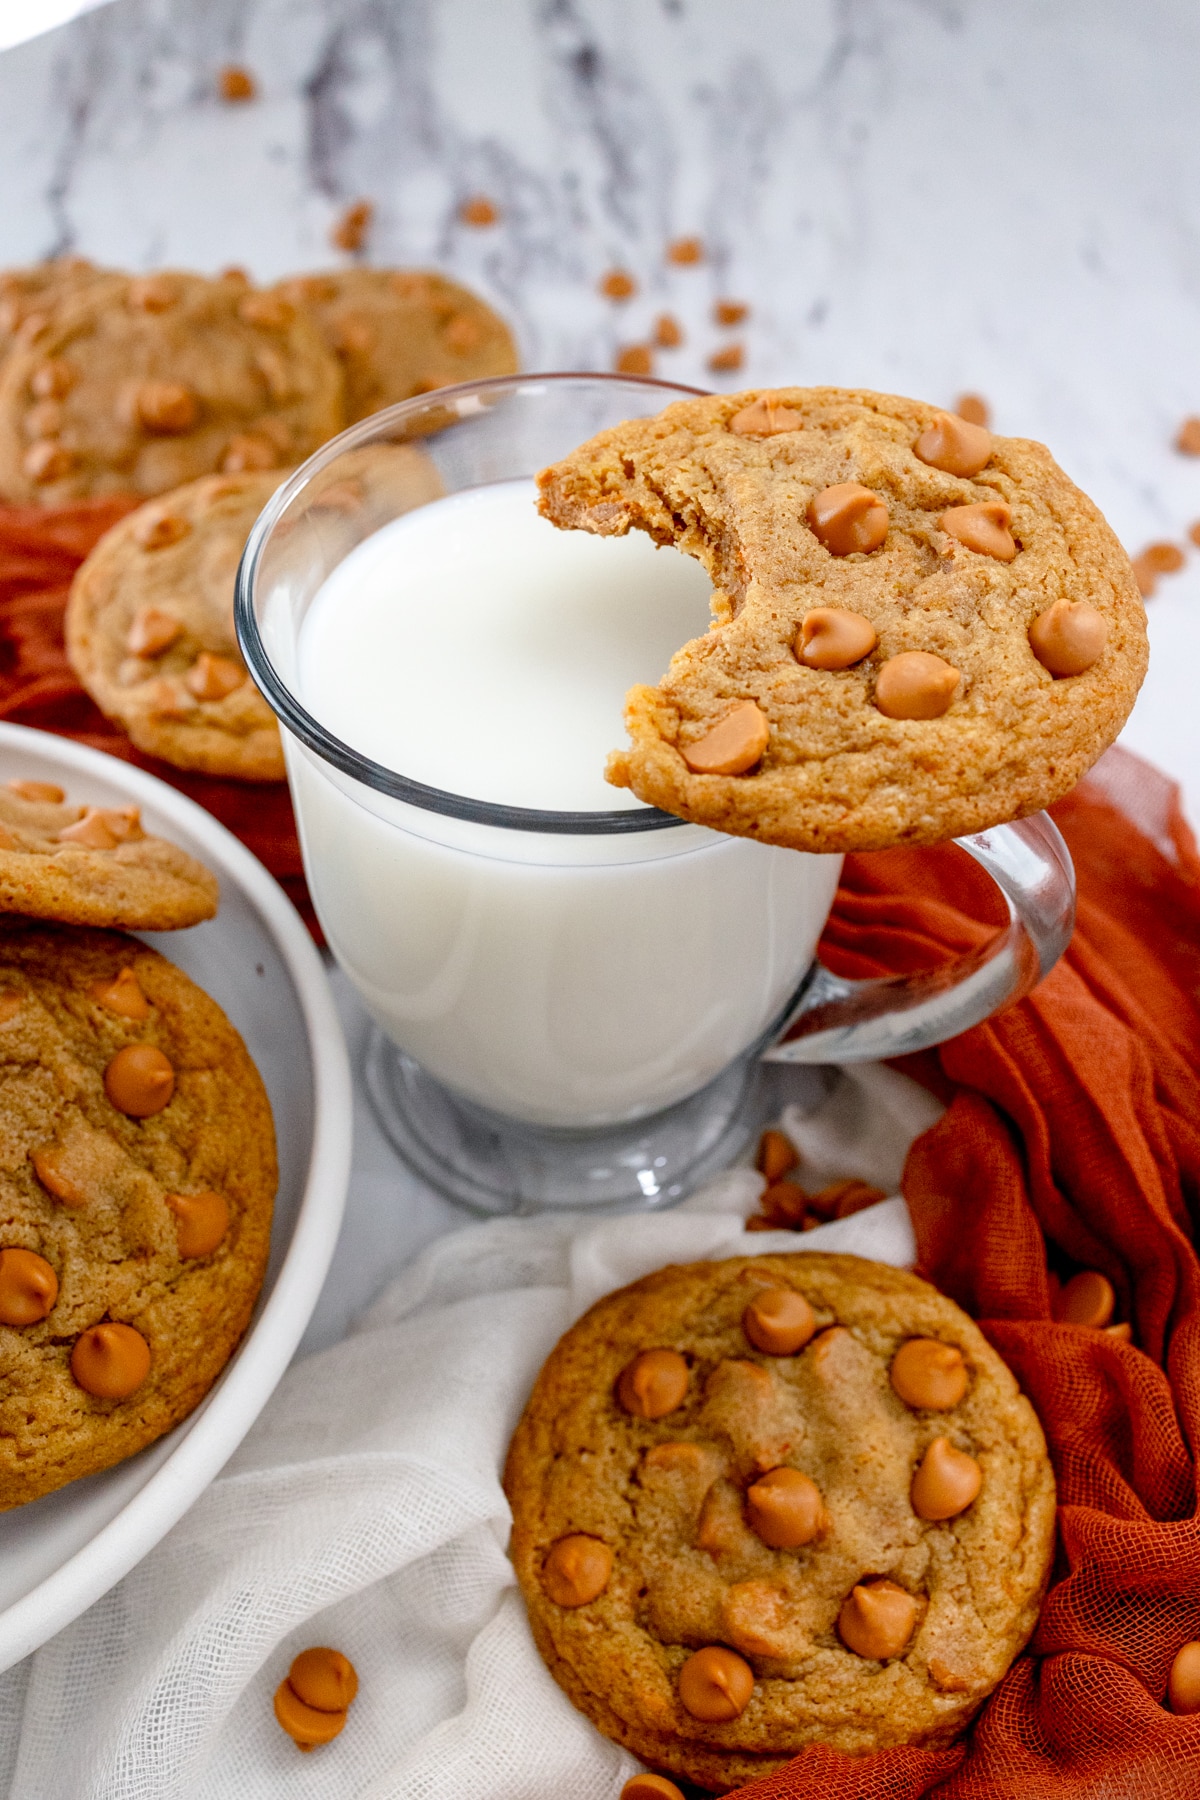 Close up view of a butterscotch cookie resting on top of a glass of milk, with other cookies around the glass.